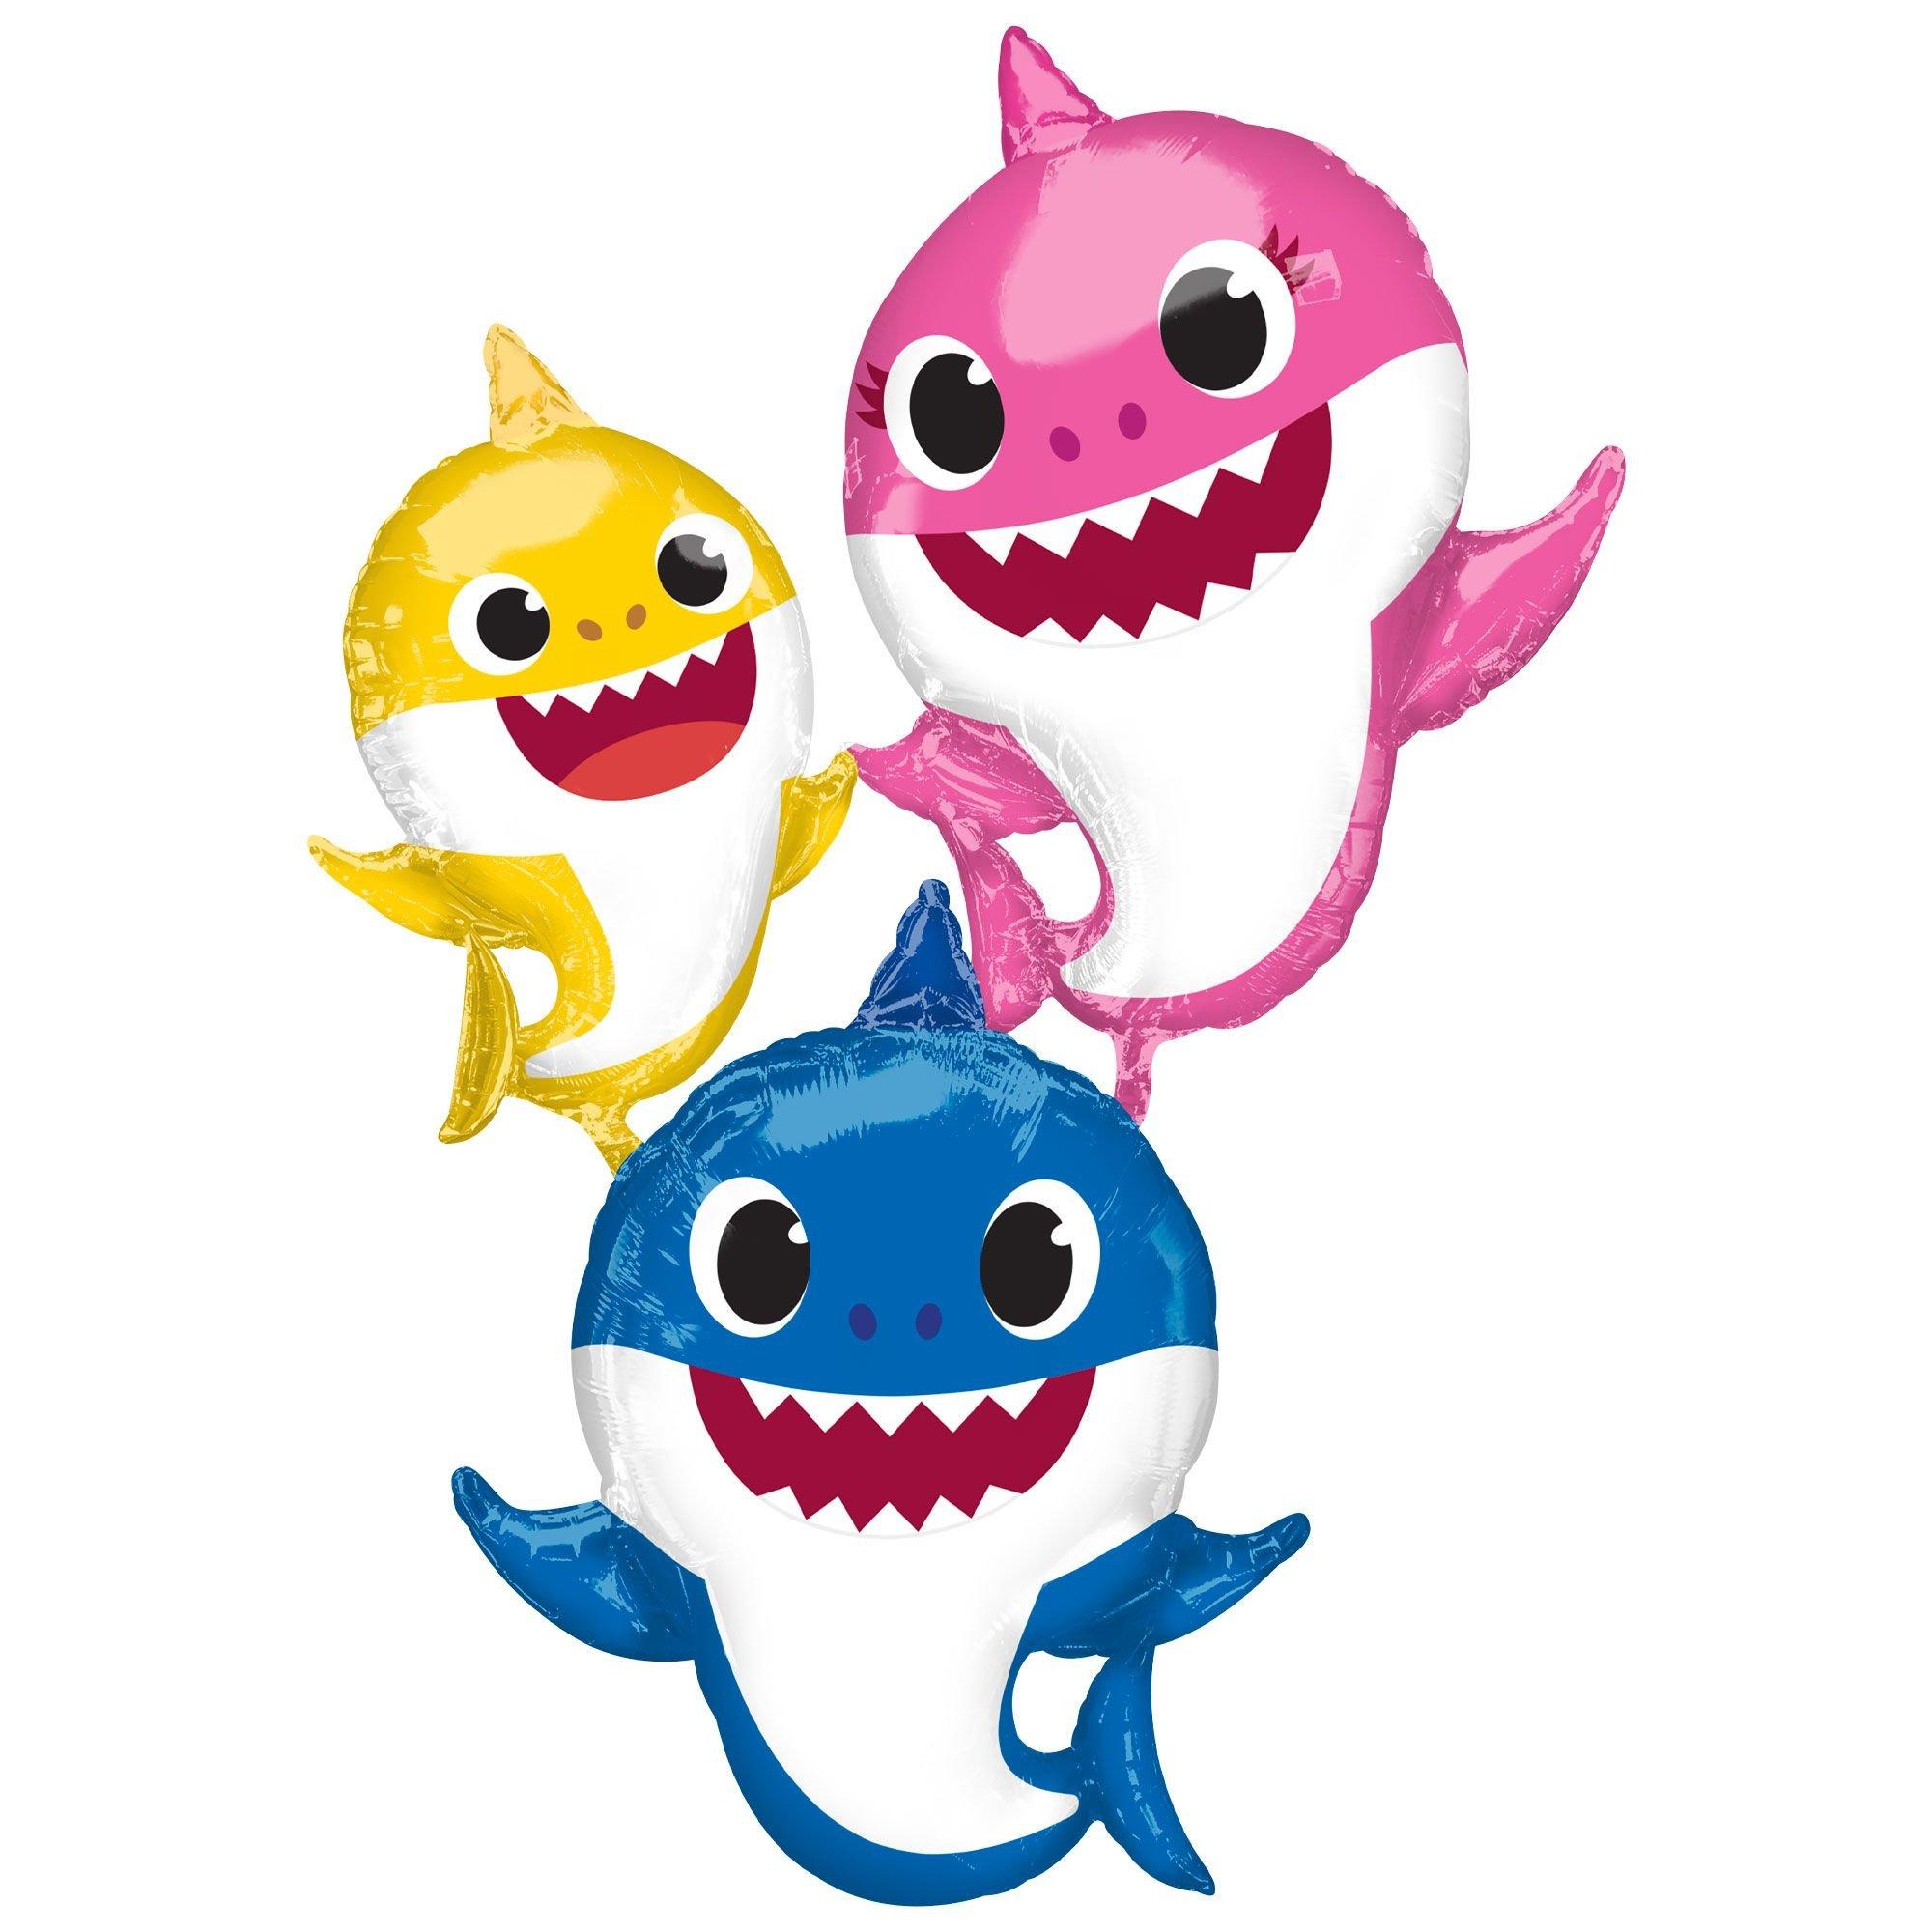 Bsstr Baby Shark Table Cover Party Supplies Decorations Birthday